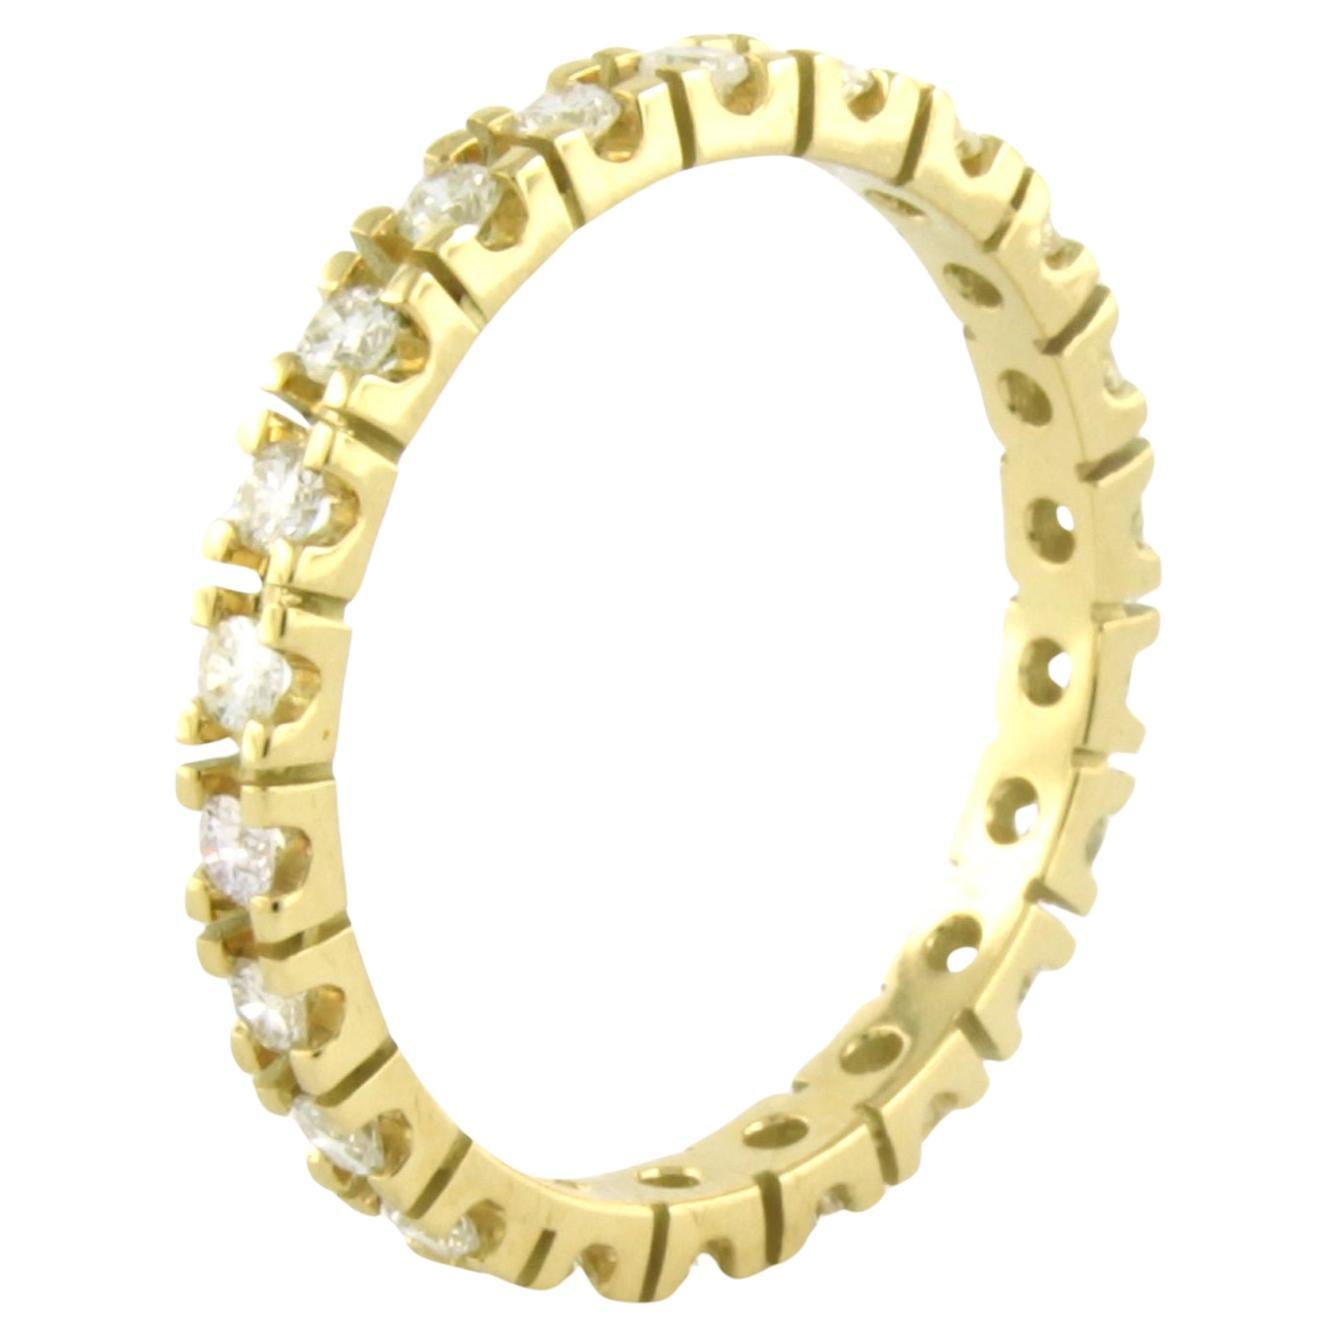 Eternity ring with brilliant cut diamonds up to 0.65ct 18k yellow gold